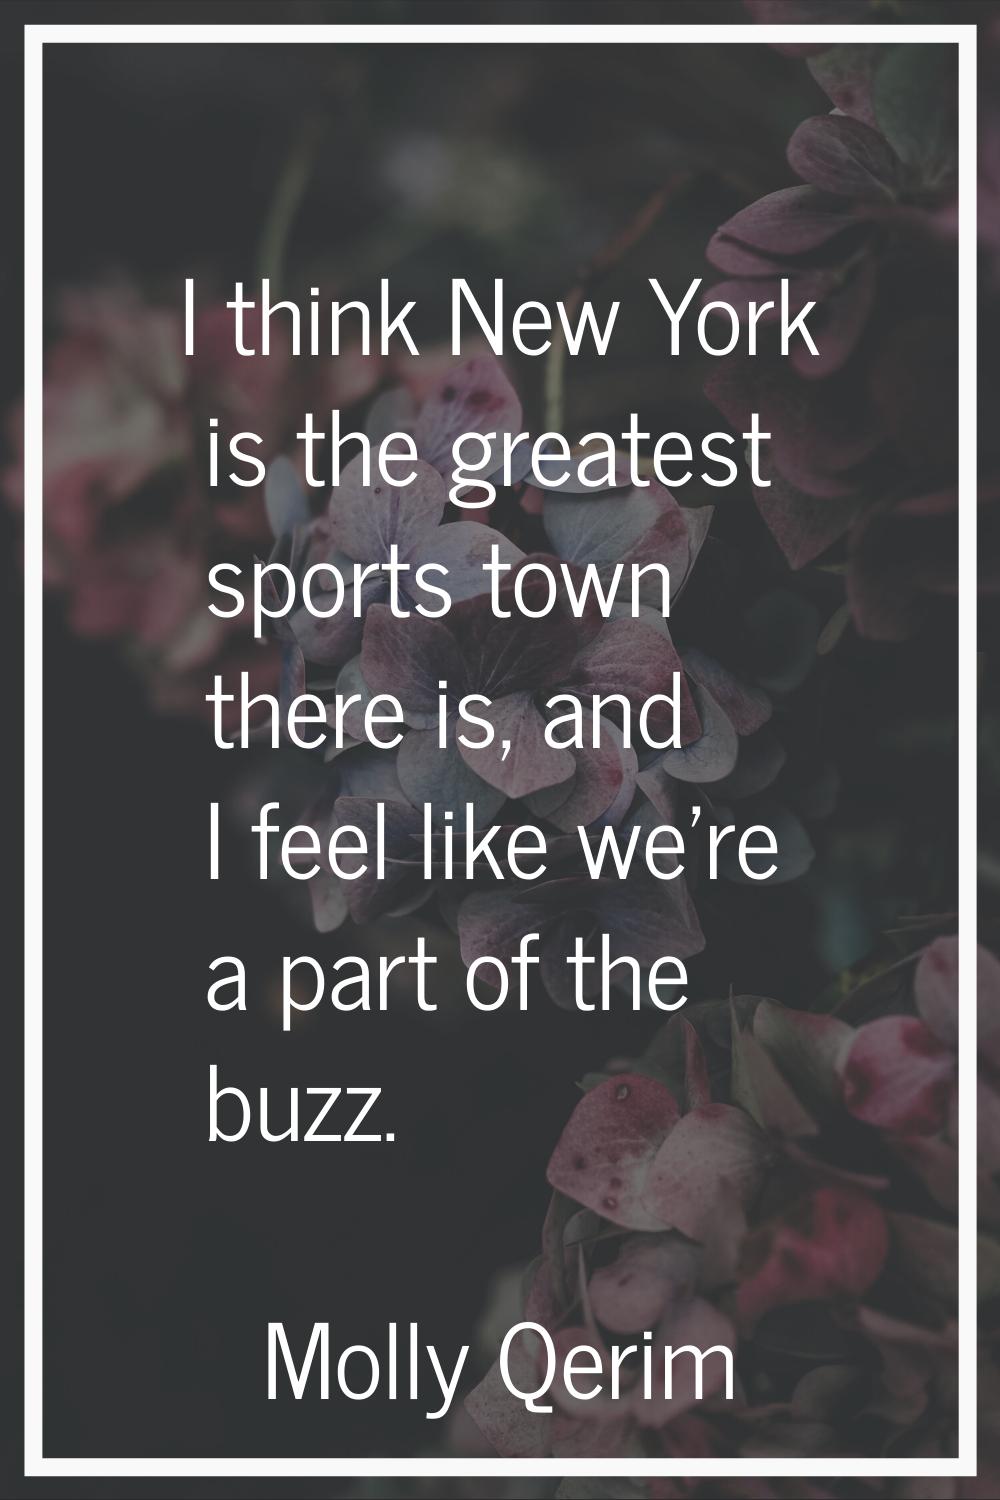 I think New York is the greatest sports town there is, and I feel like we're a part of the buzz.